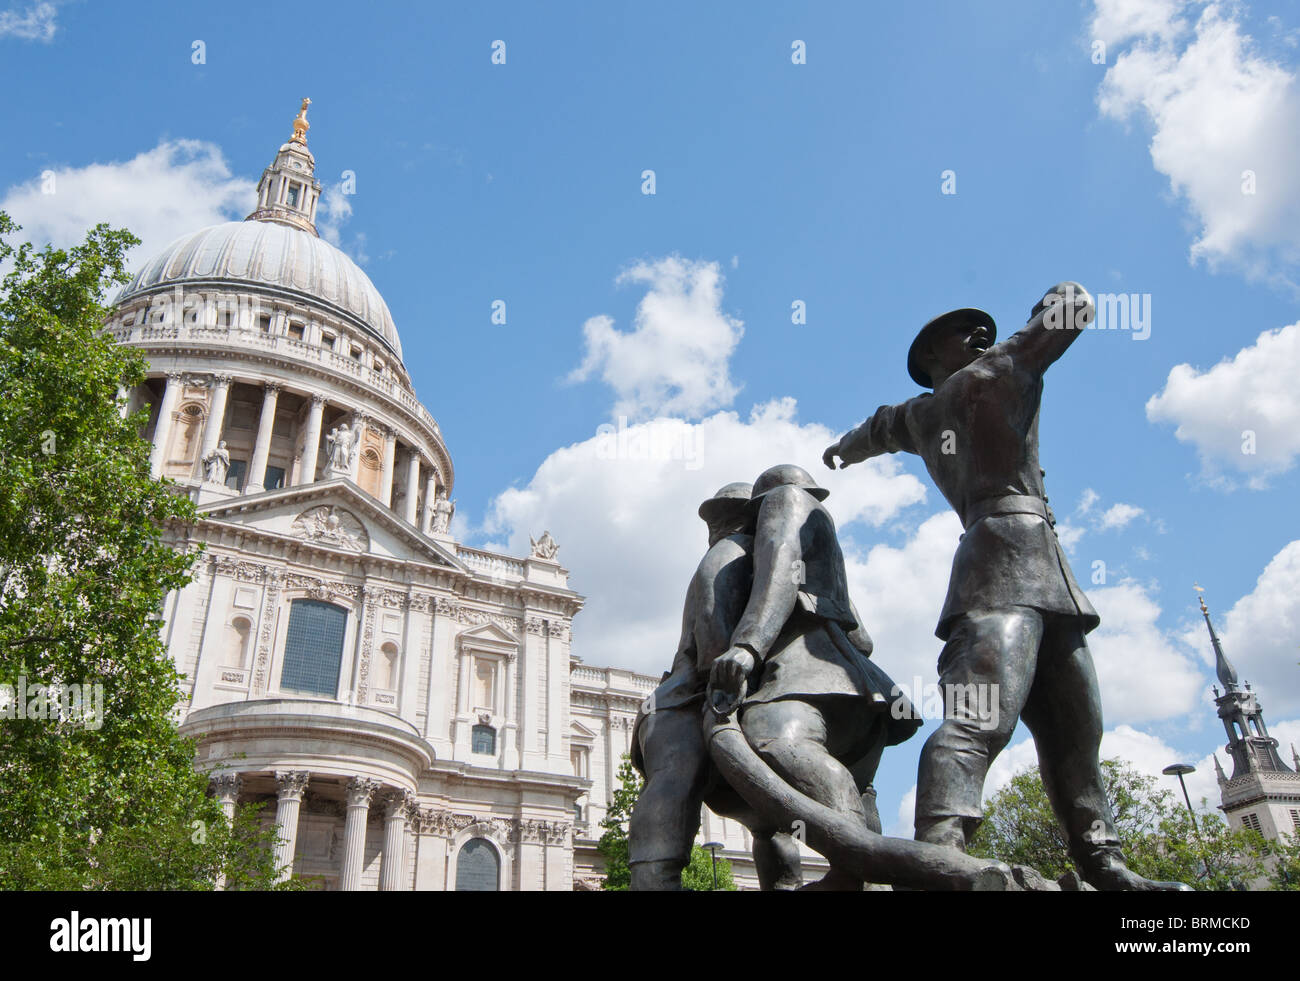 Memorial to London's firemen in the second world war at St Pauls Cathedral, England. Stock Photo